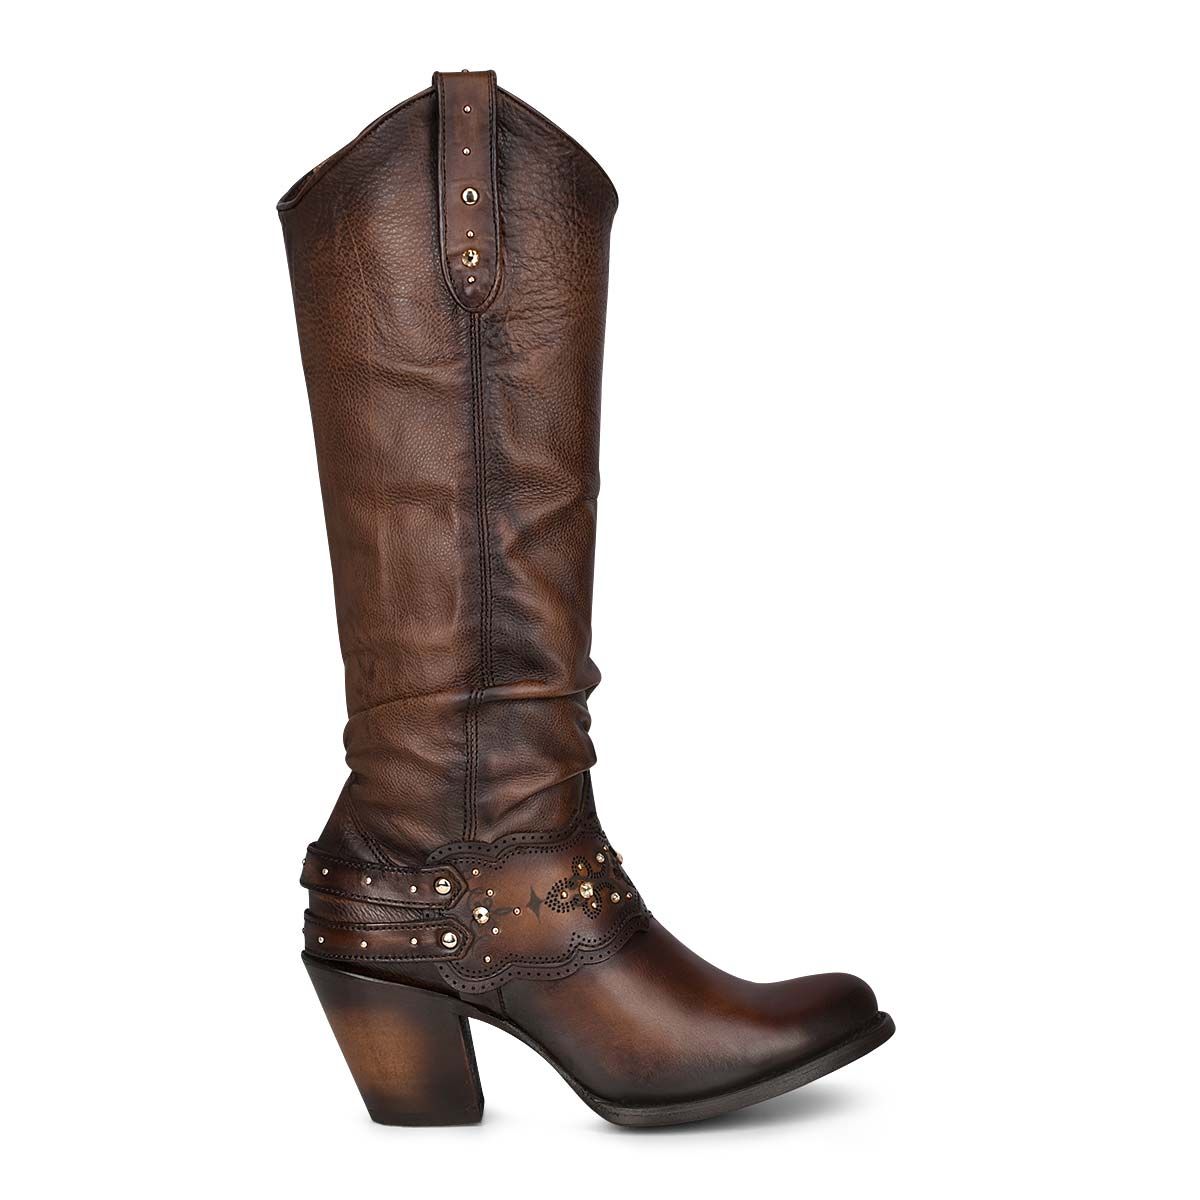 1Z41RS - Cuadra dark brown casual cowgirl leather knee high boots for women-Kuet.us